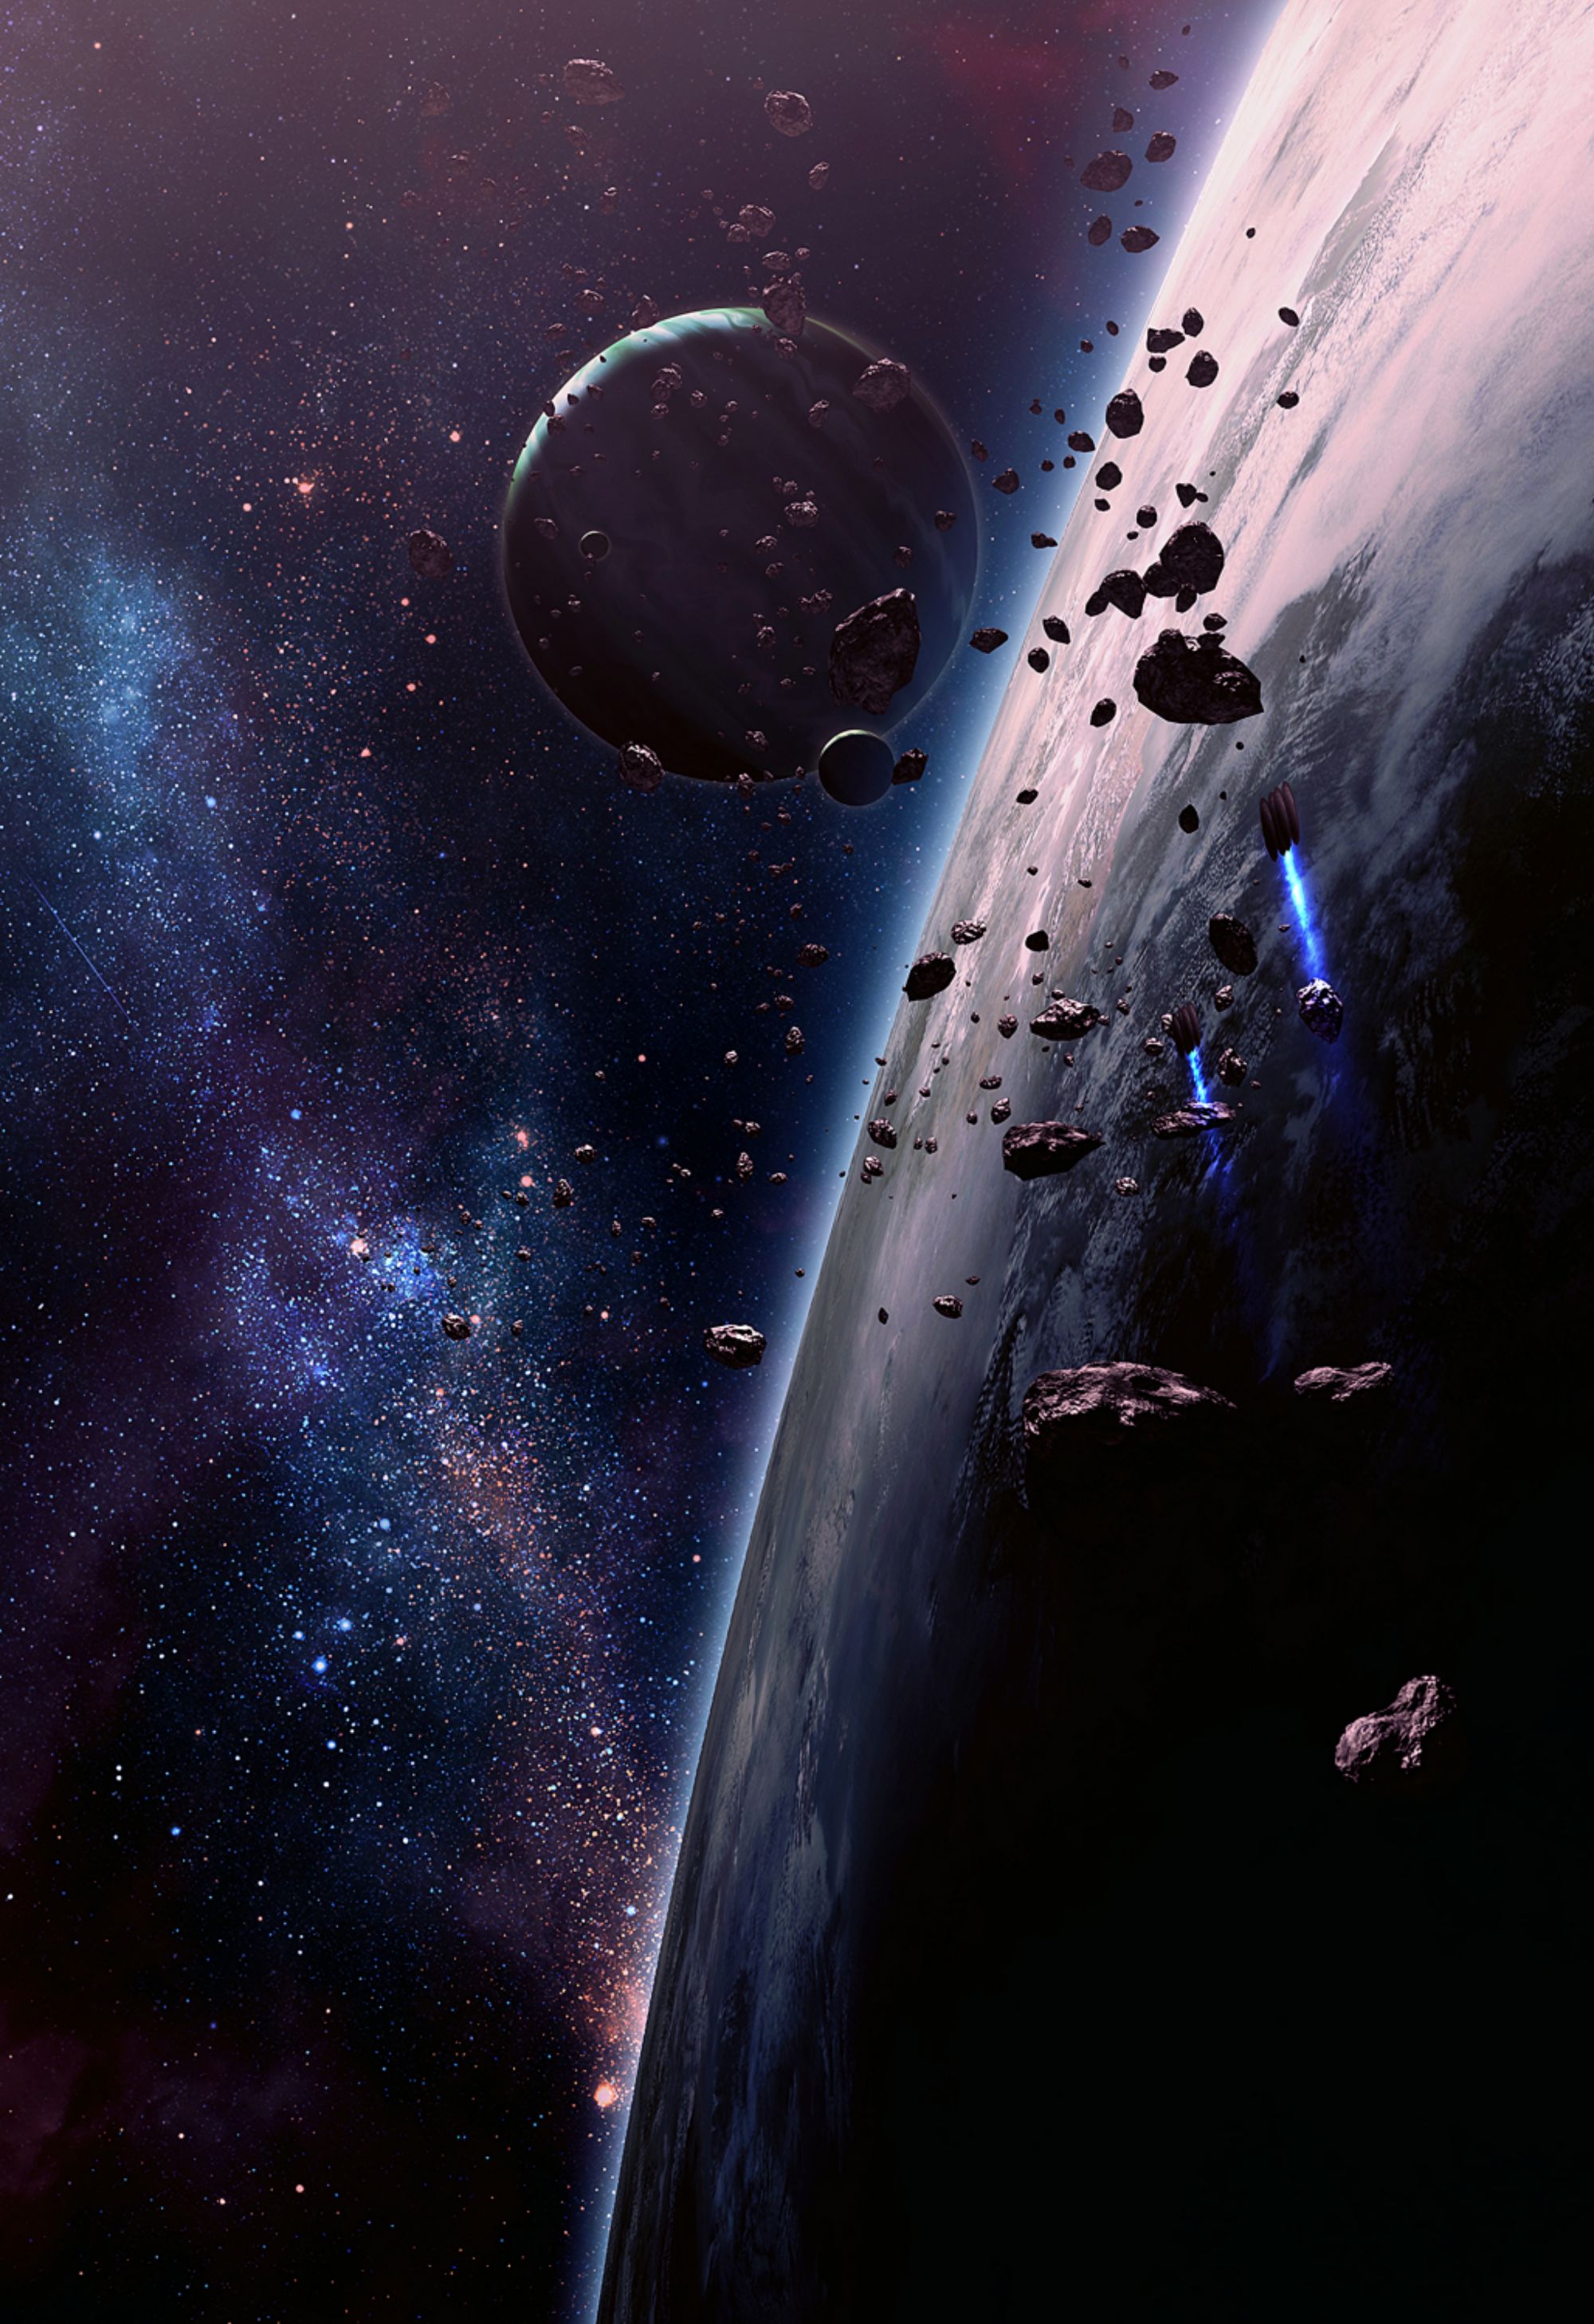 Download Planet wallpaper for mobile